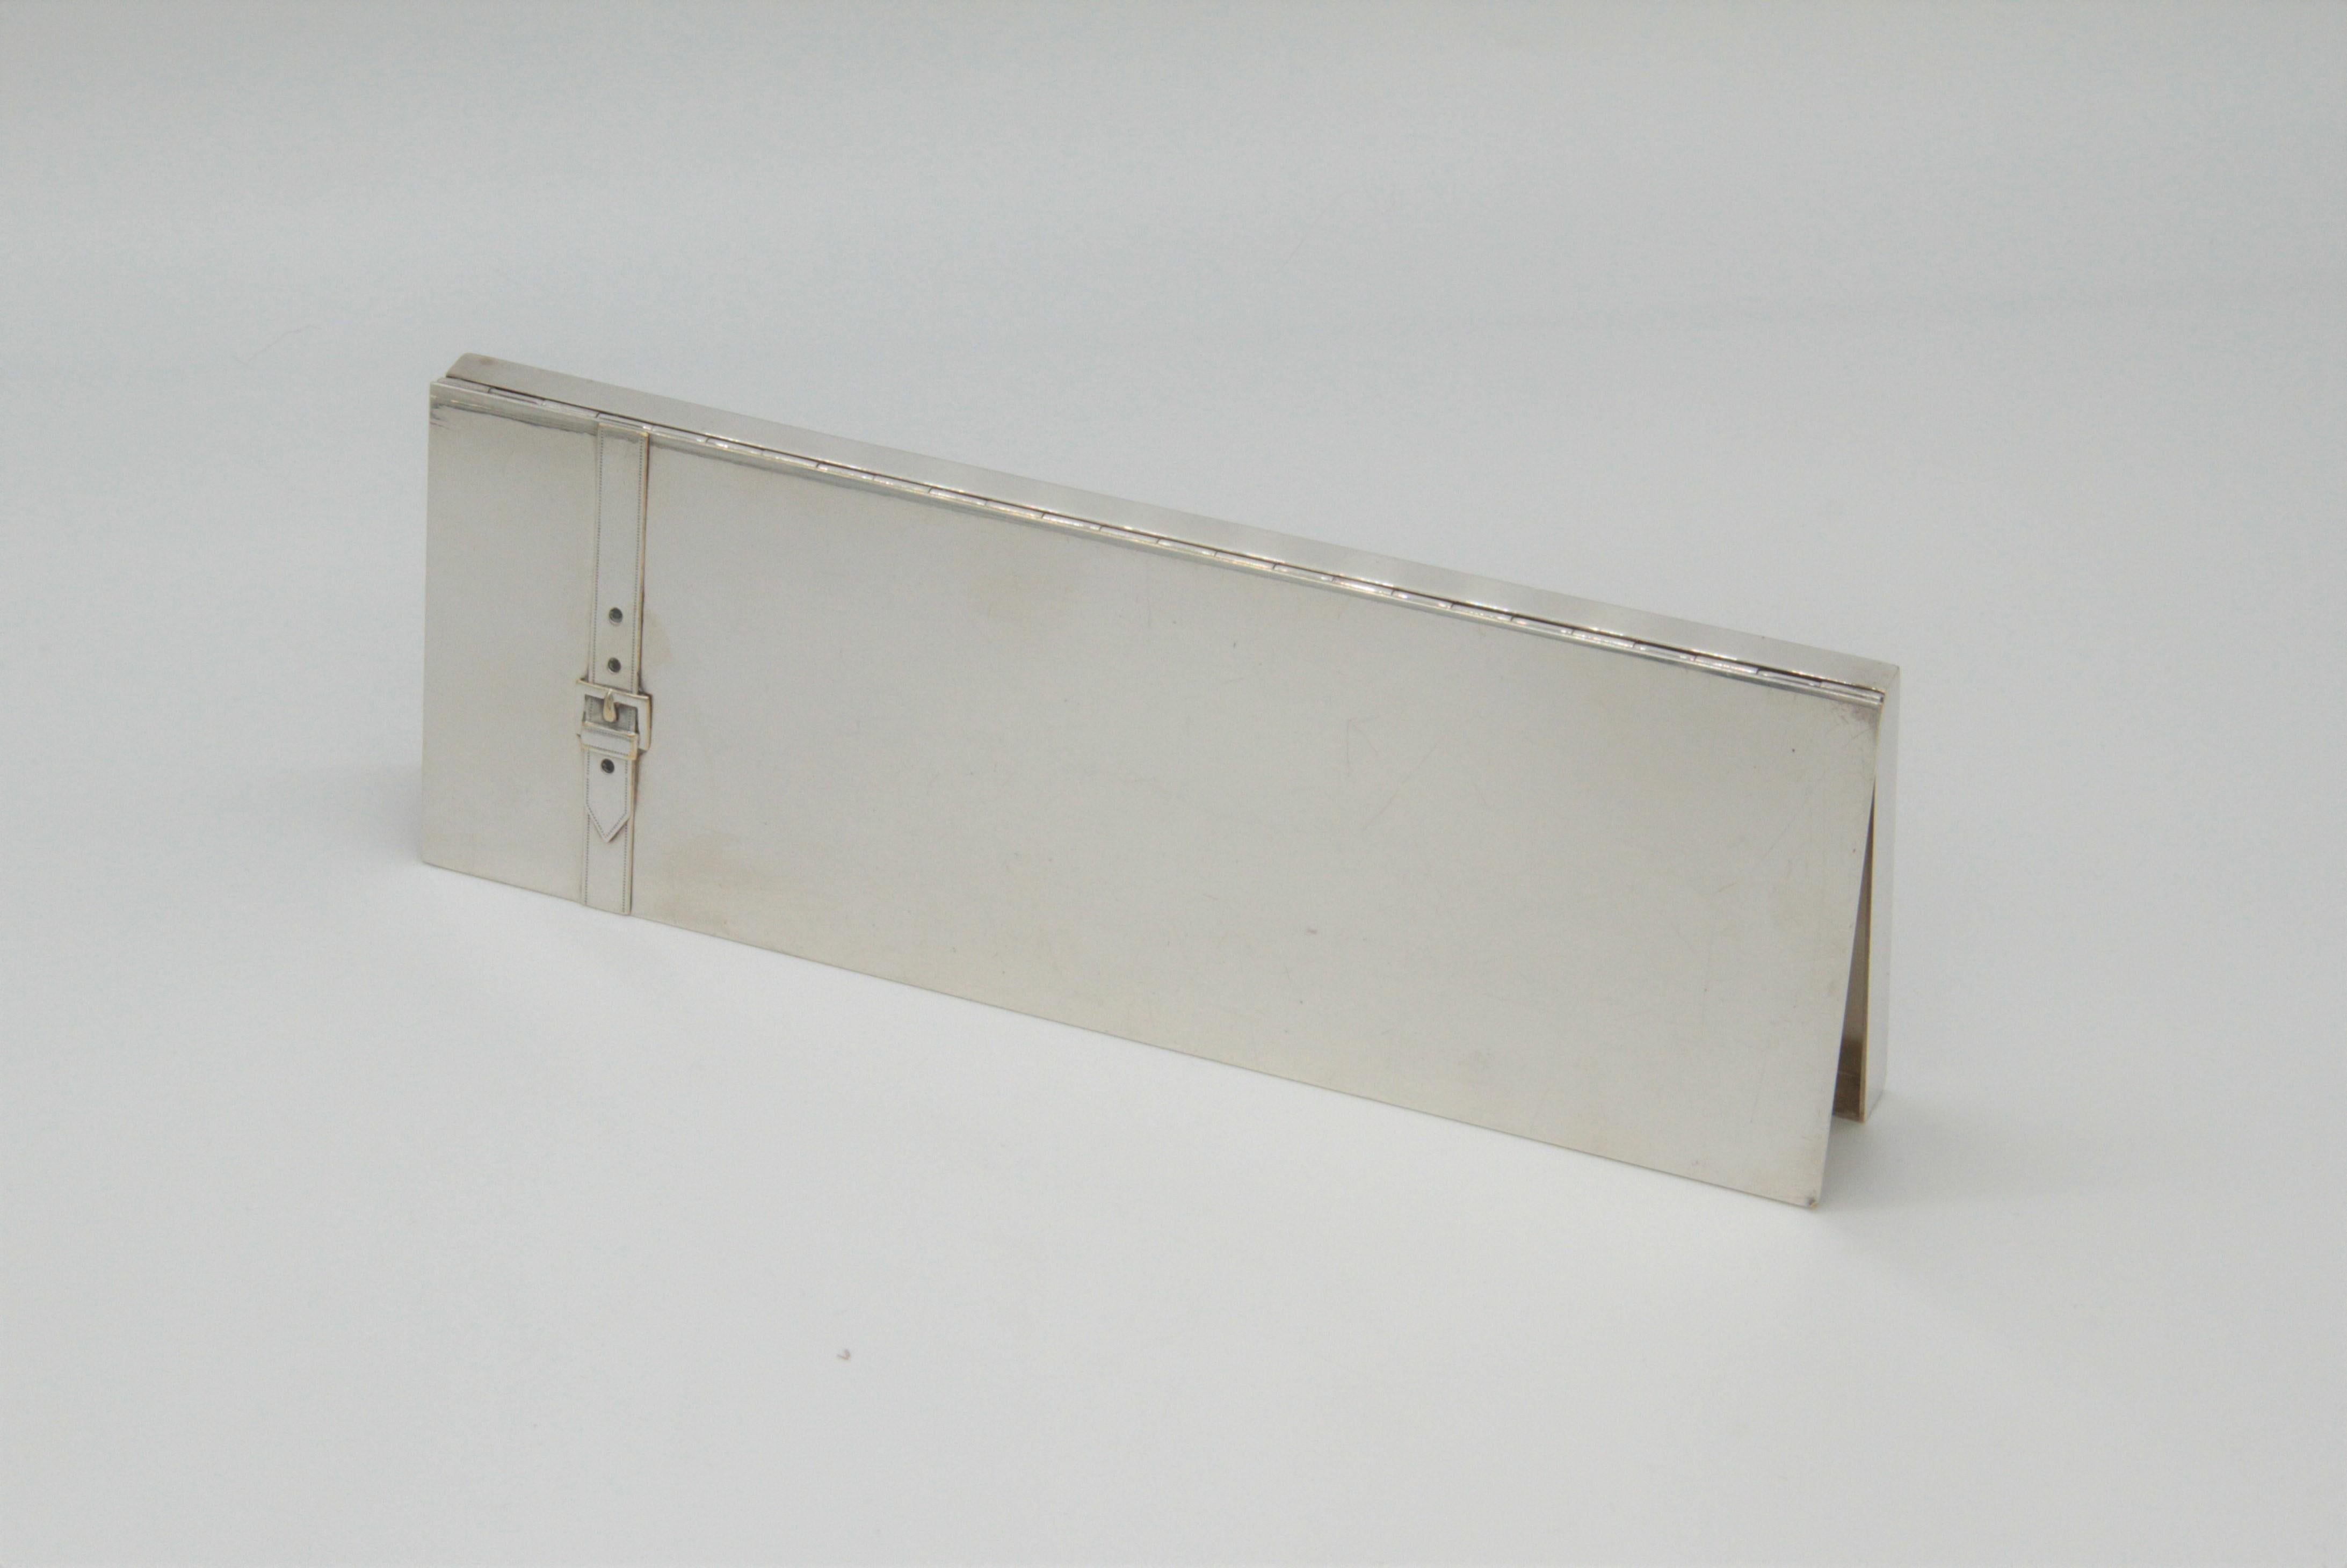 Silvered-Metal Cigarette Box by Maria Perguay, 1960s In Good Condition For Sale In Paris, France